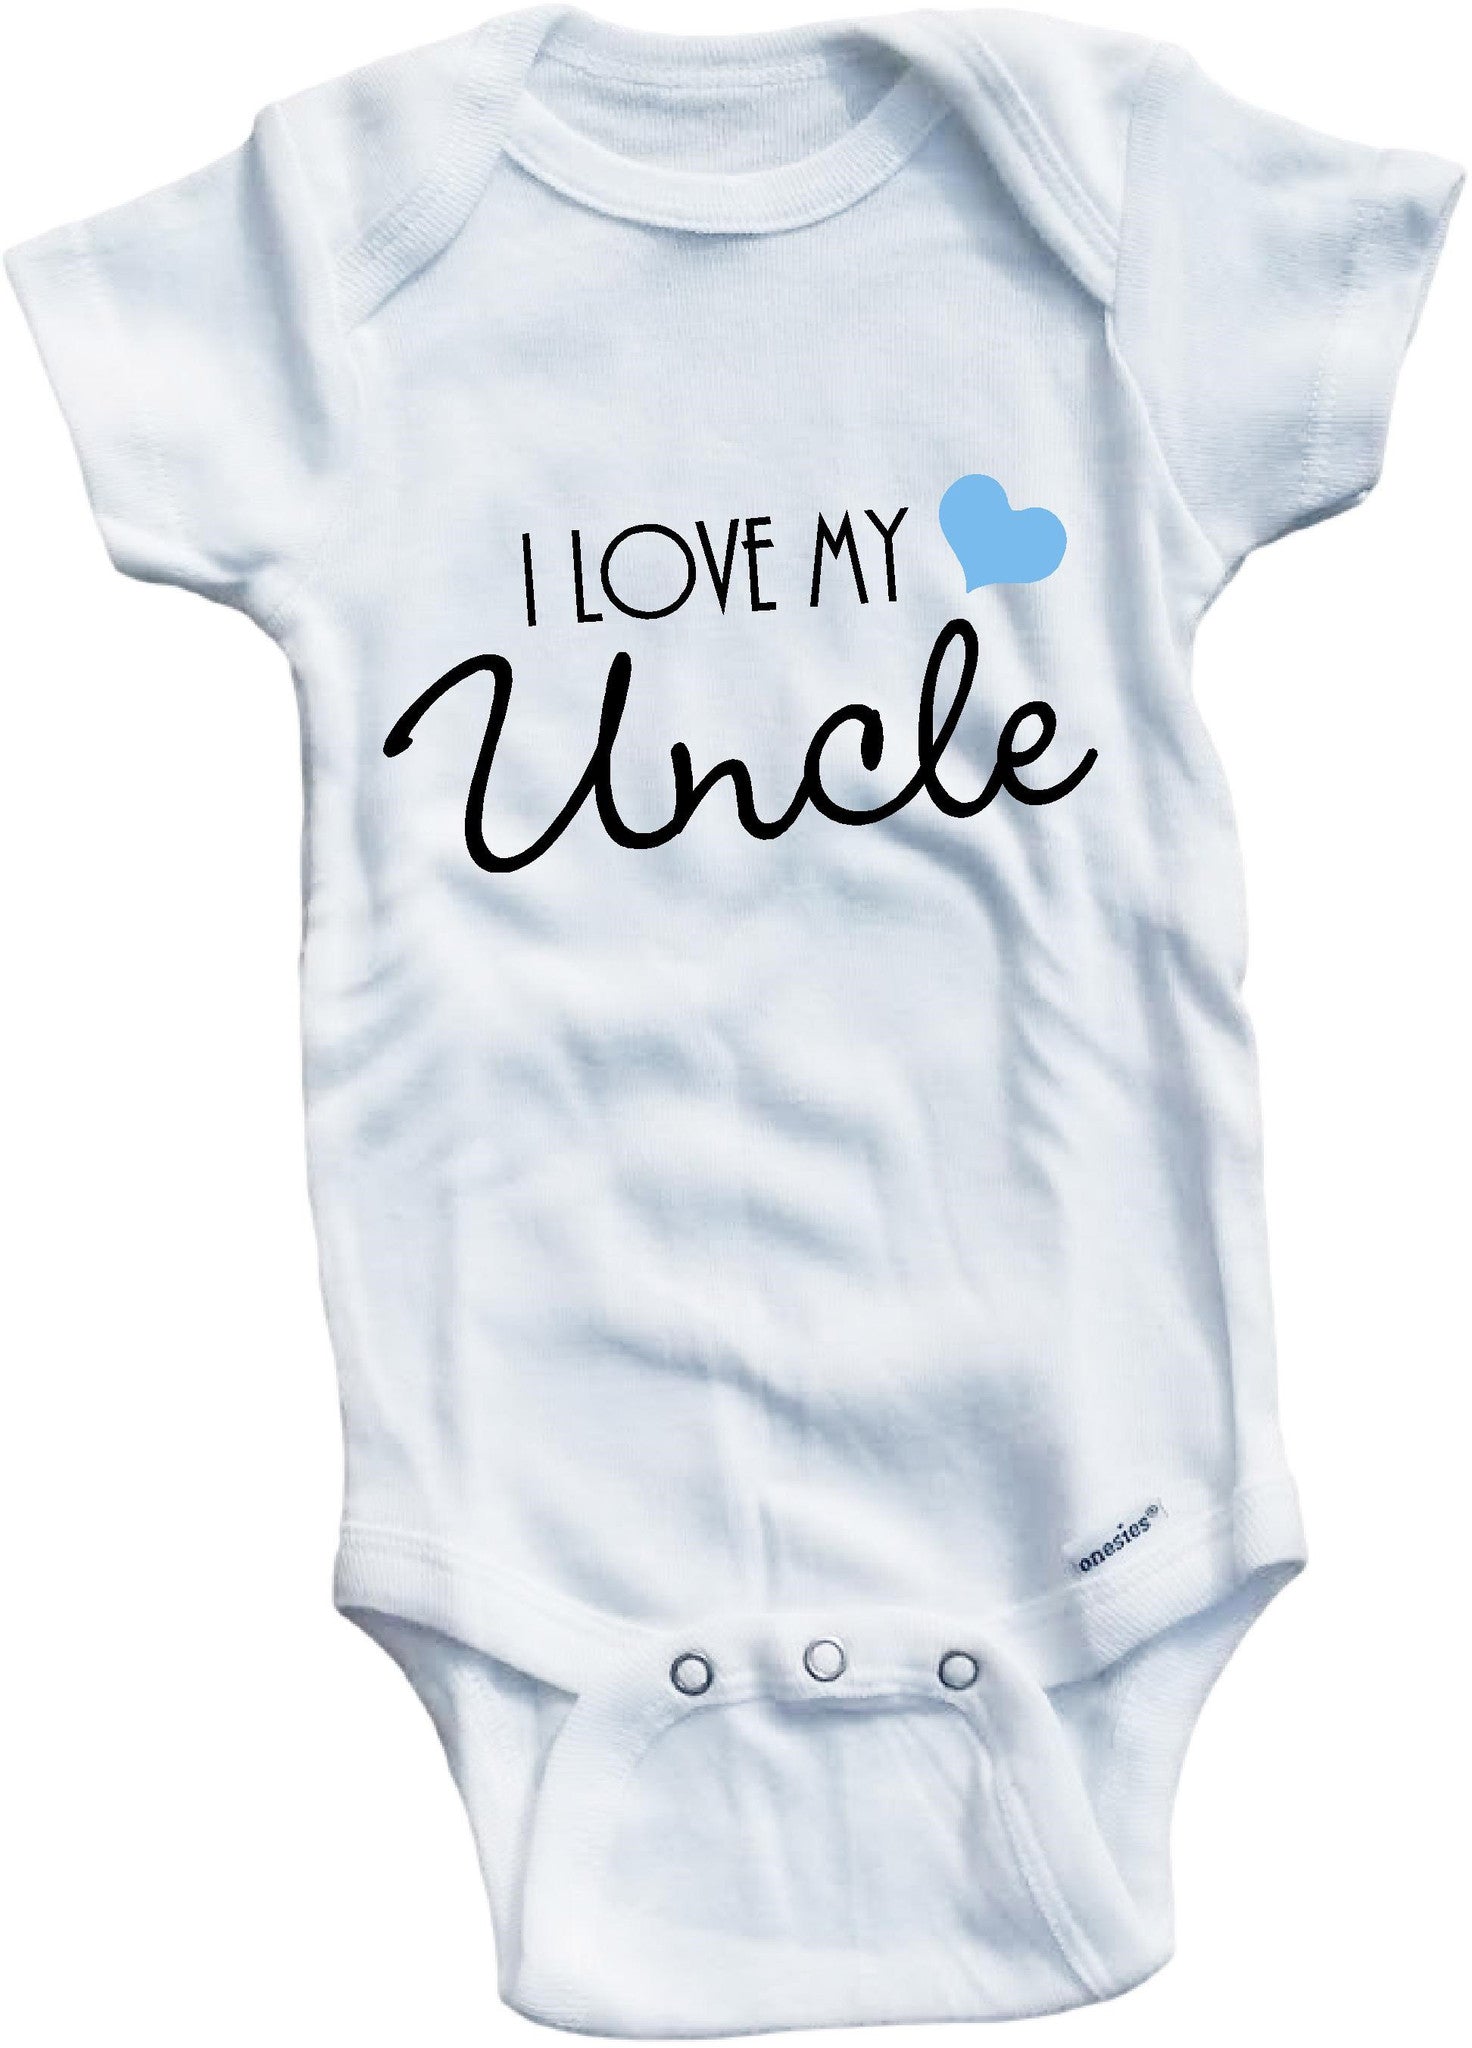 funny baby onesies from uncle